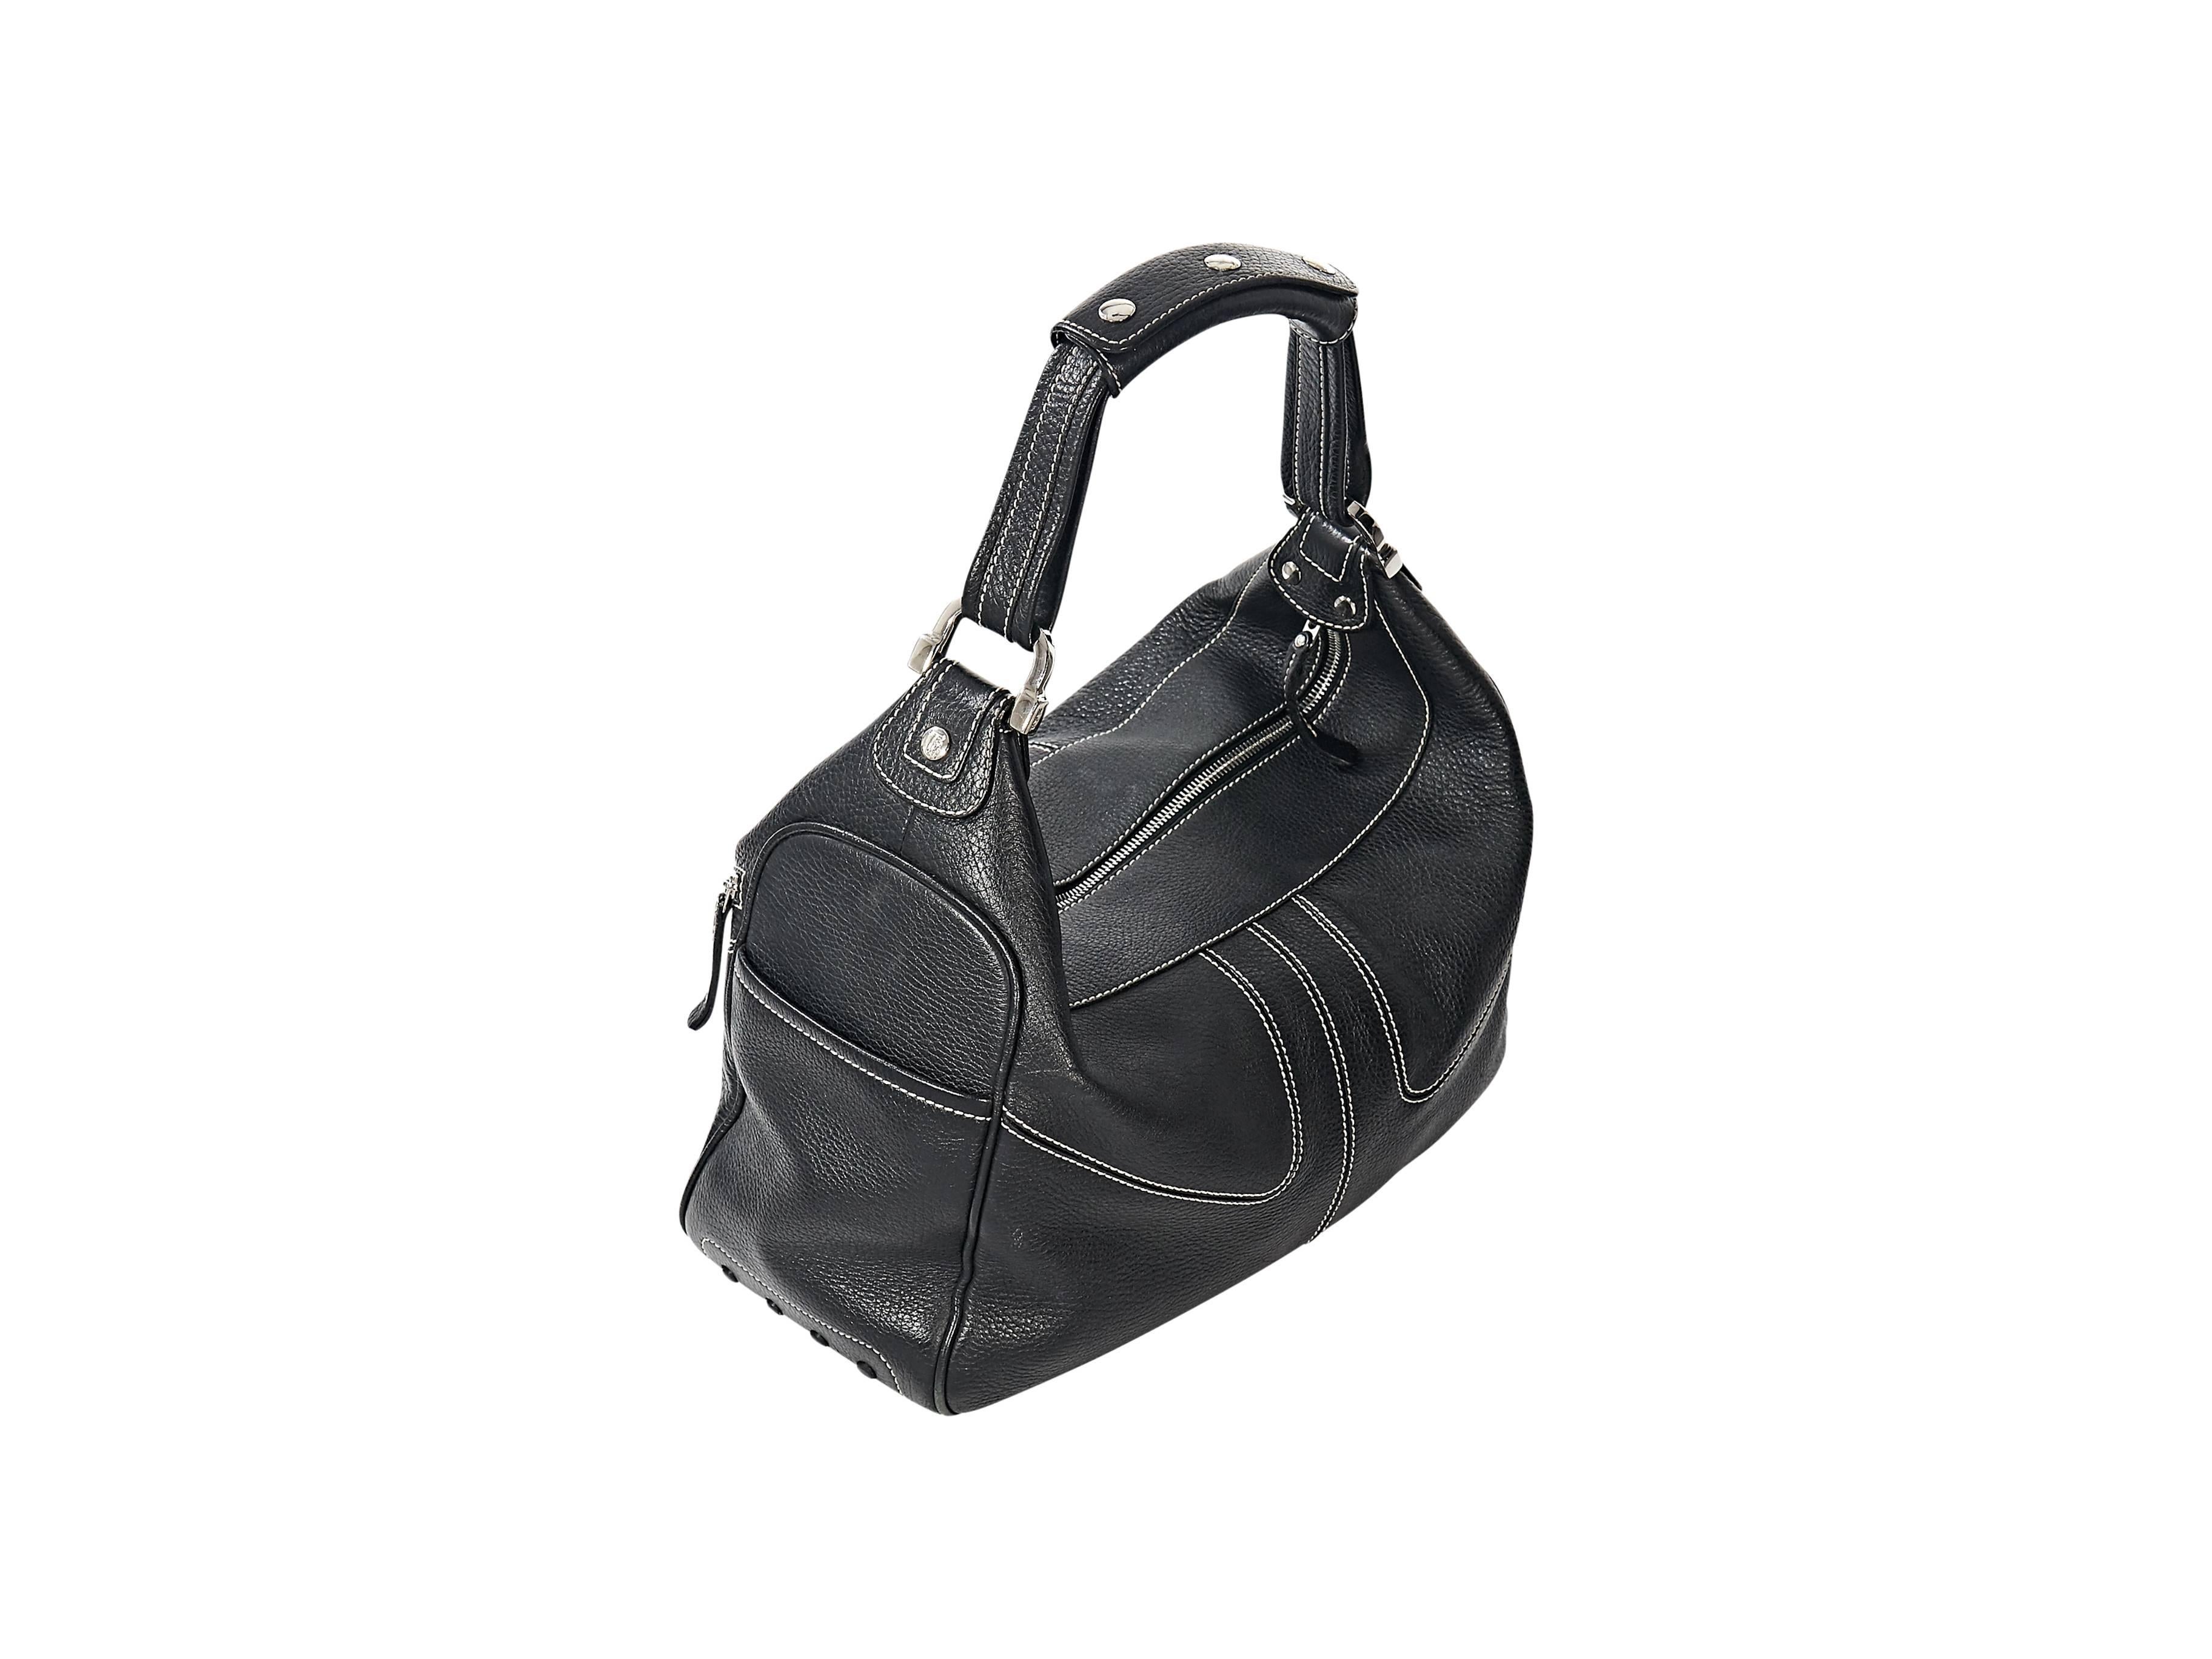 Product details: Black leather Miky hobo bag by Tod's. Accented with white topstitching. Single shoulder strap. Top zip closure. Front zip pockets. Lined interior with inner zip pocket. Protective rubber feet at corners. Silvertone hardware.